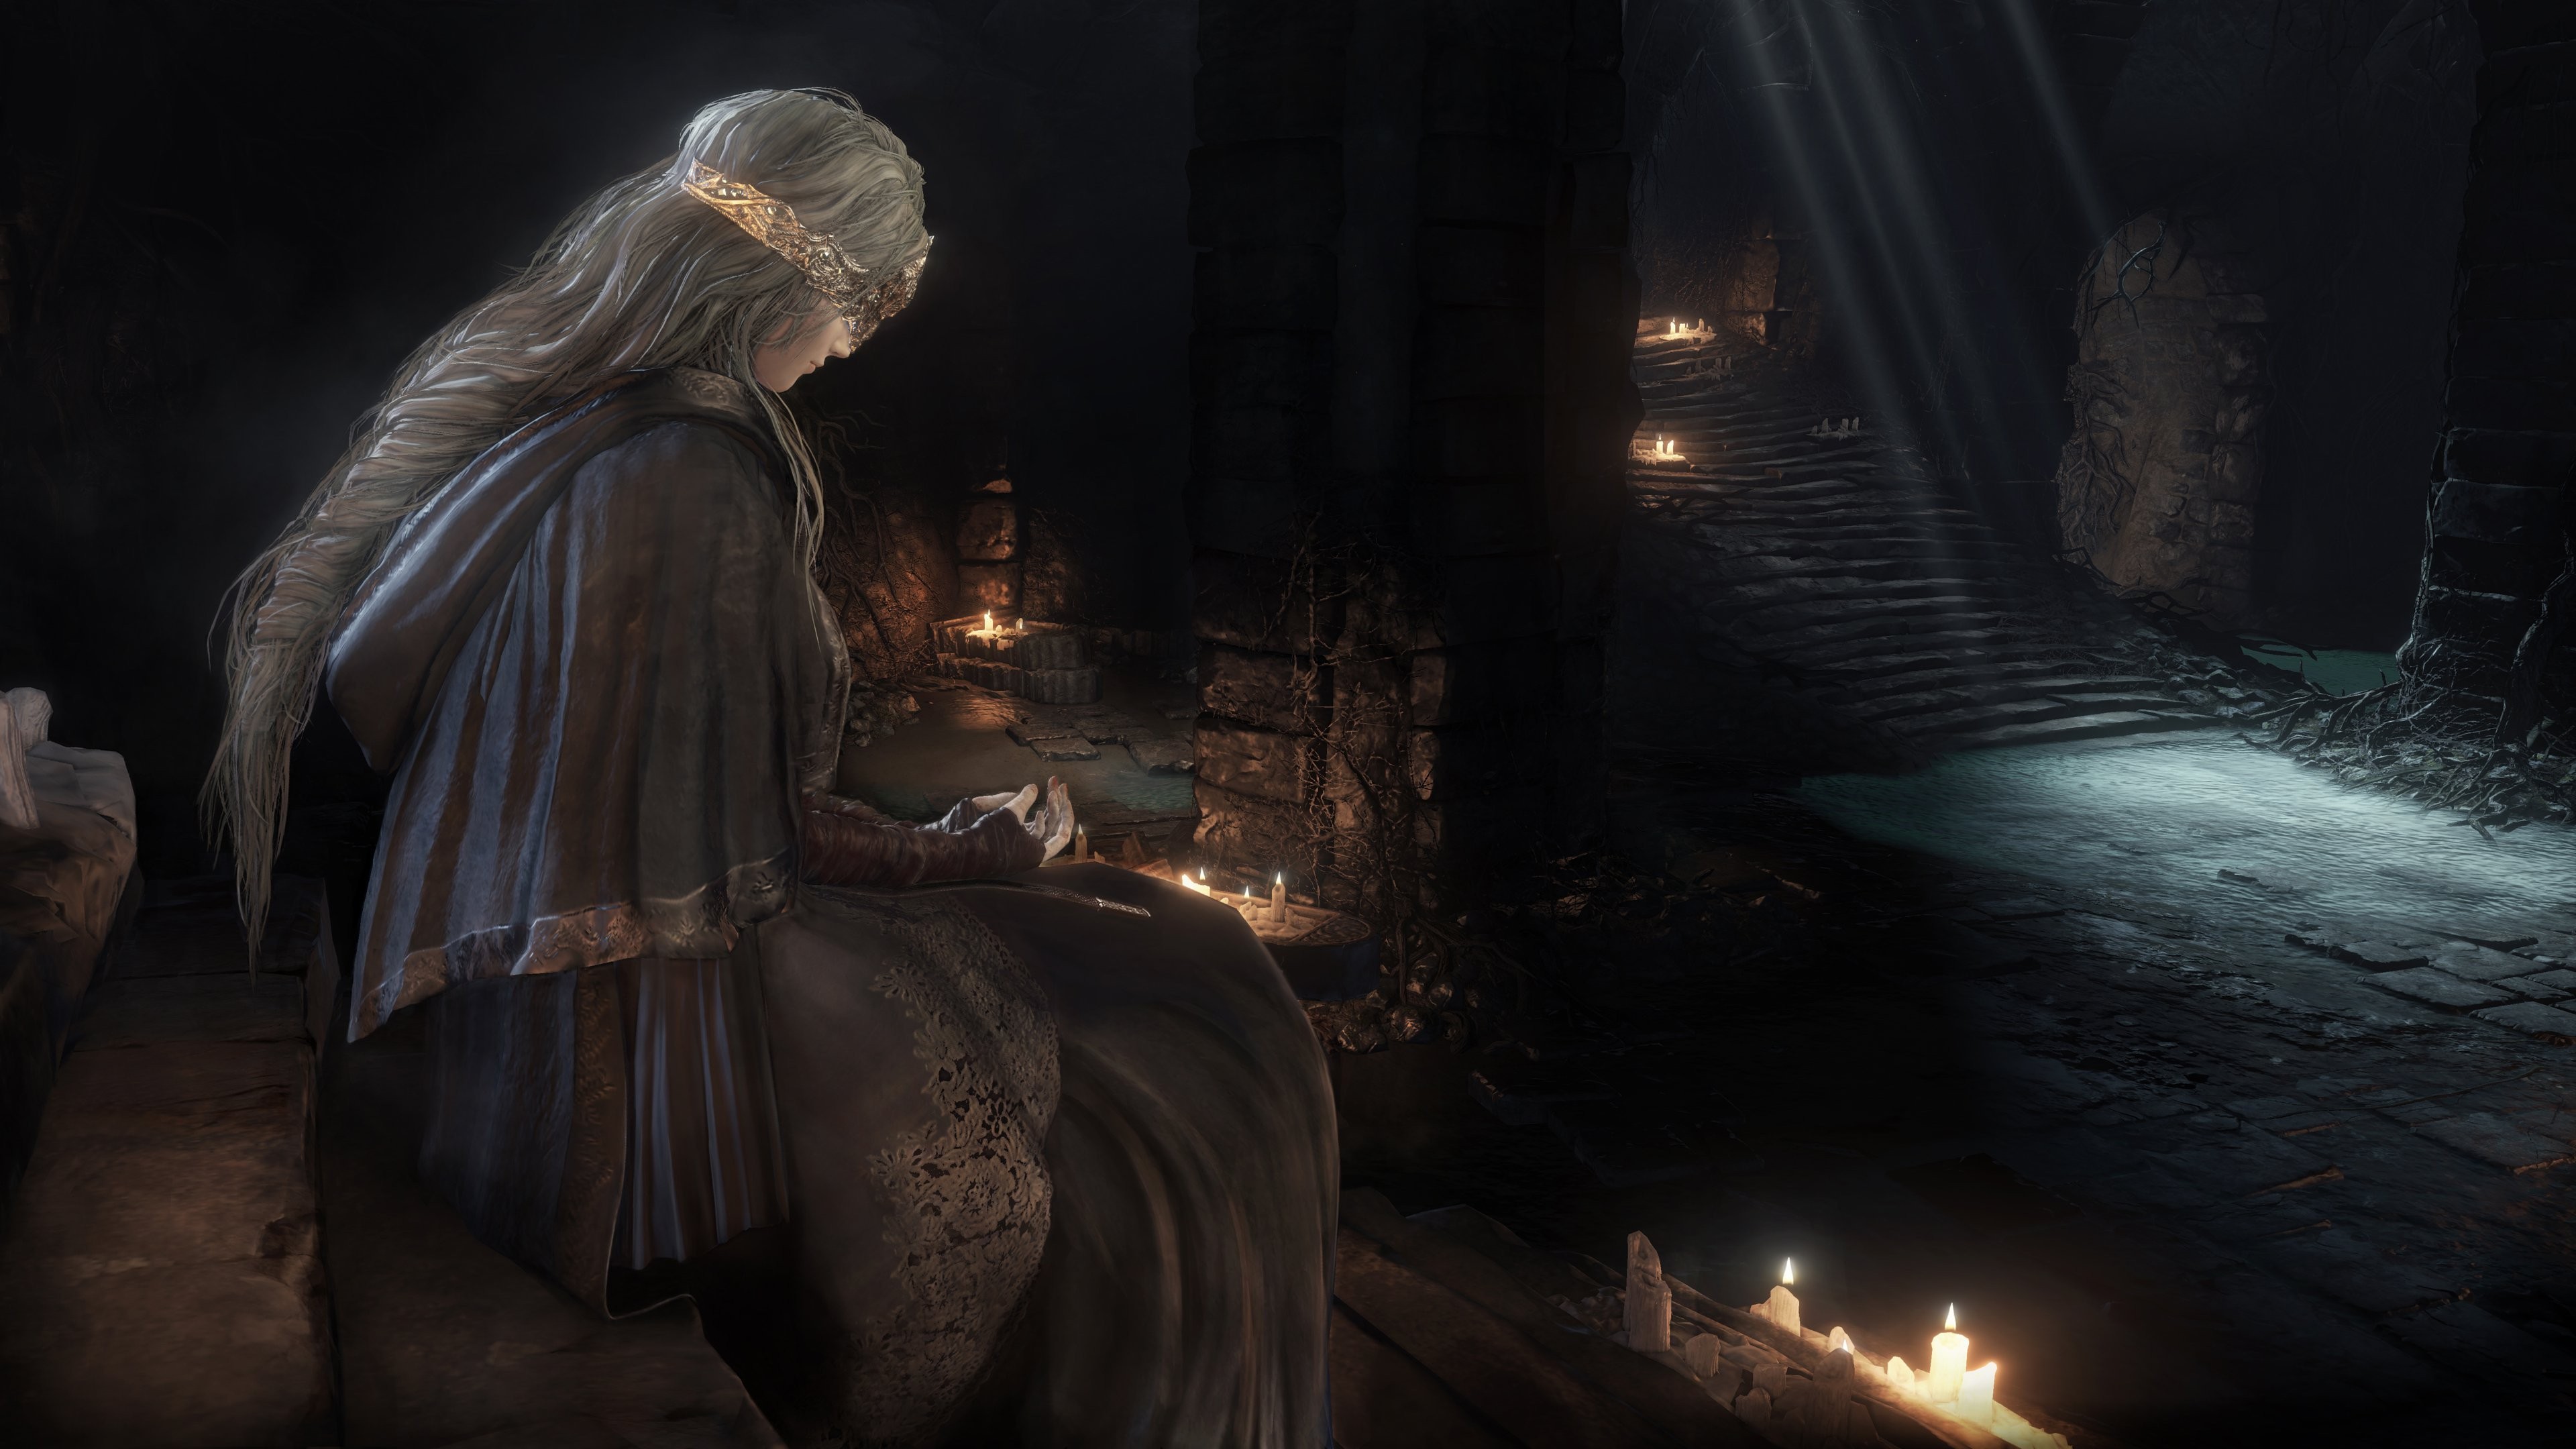 General 3840x2160 Dark Souls III Dark Souls Gothic video games Fire Keeper From Software fantasy art fantasy girl video game girls video game art long hair candles sitting